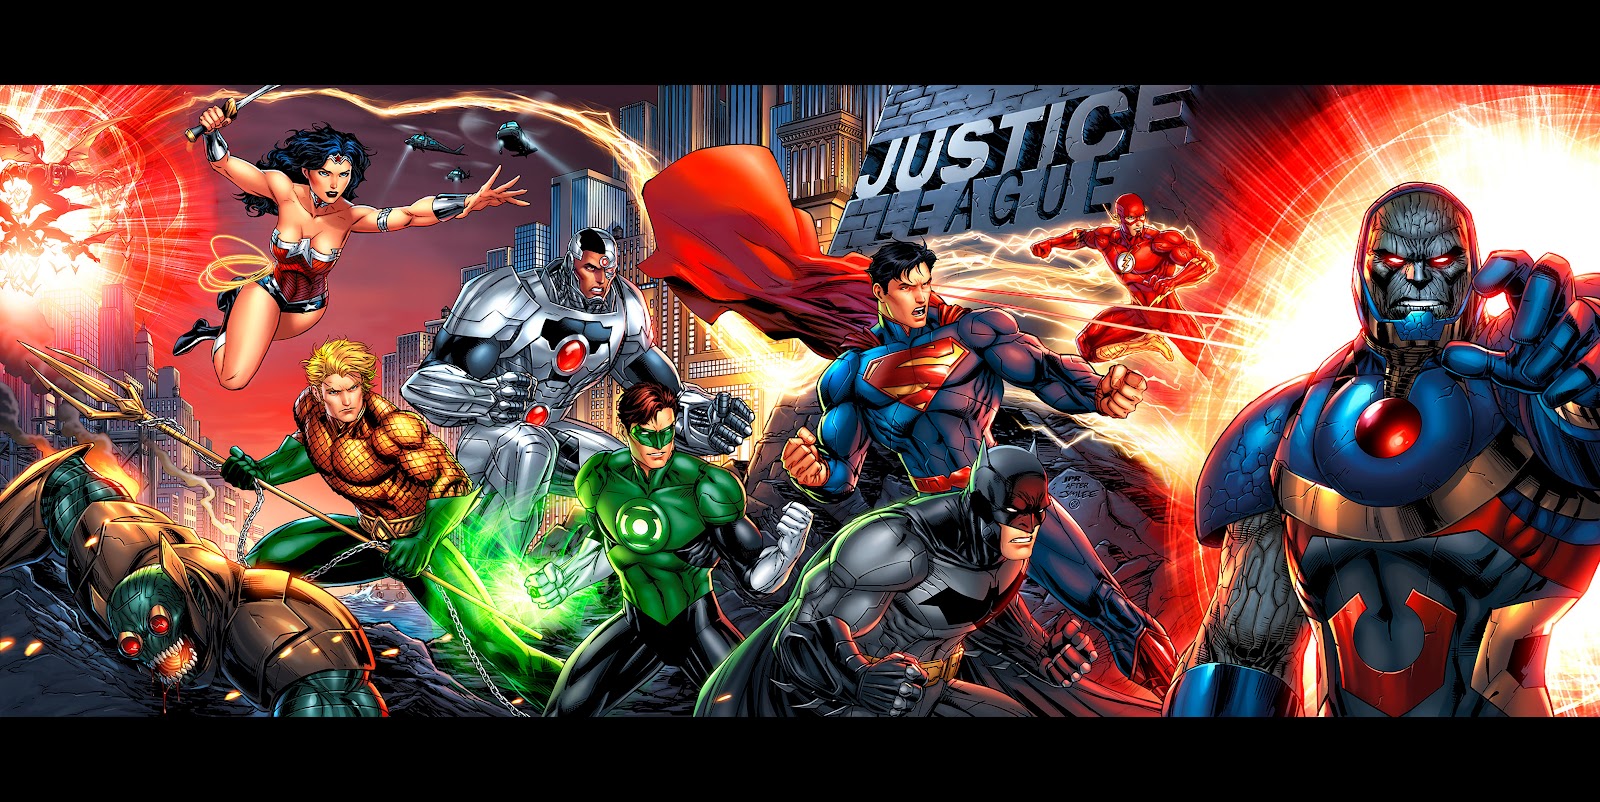 The Wallpaper Of Superman And New Justice League Above Are By